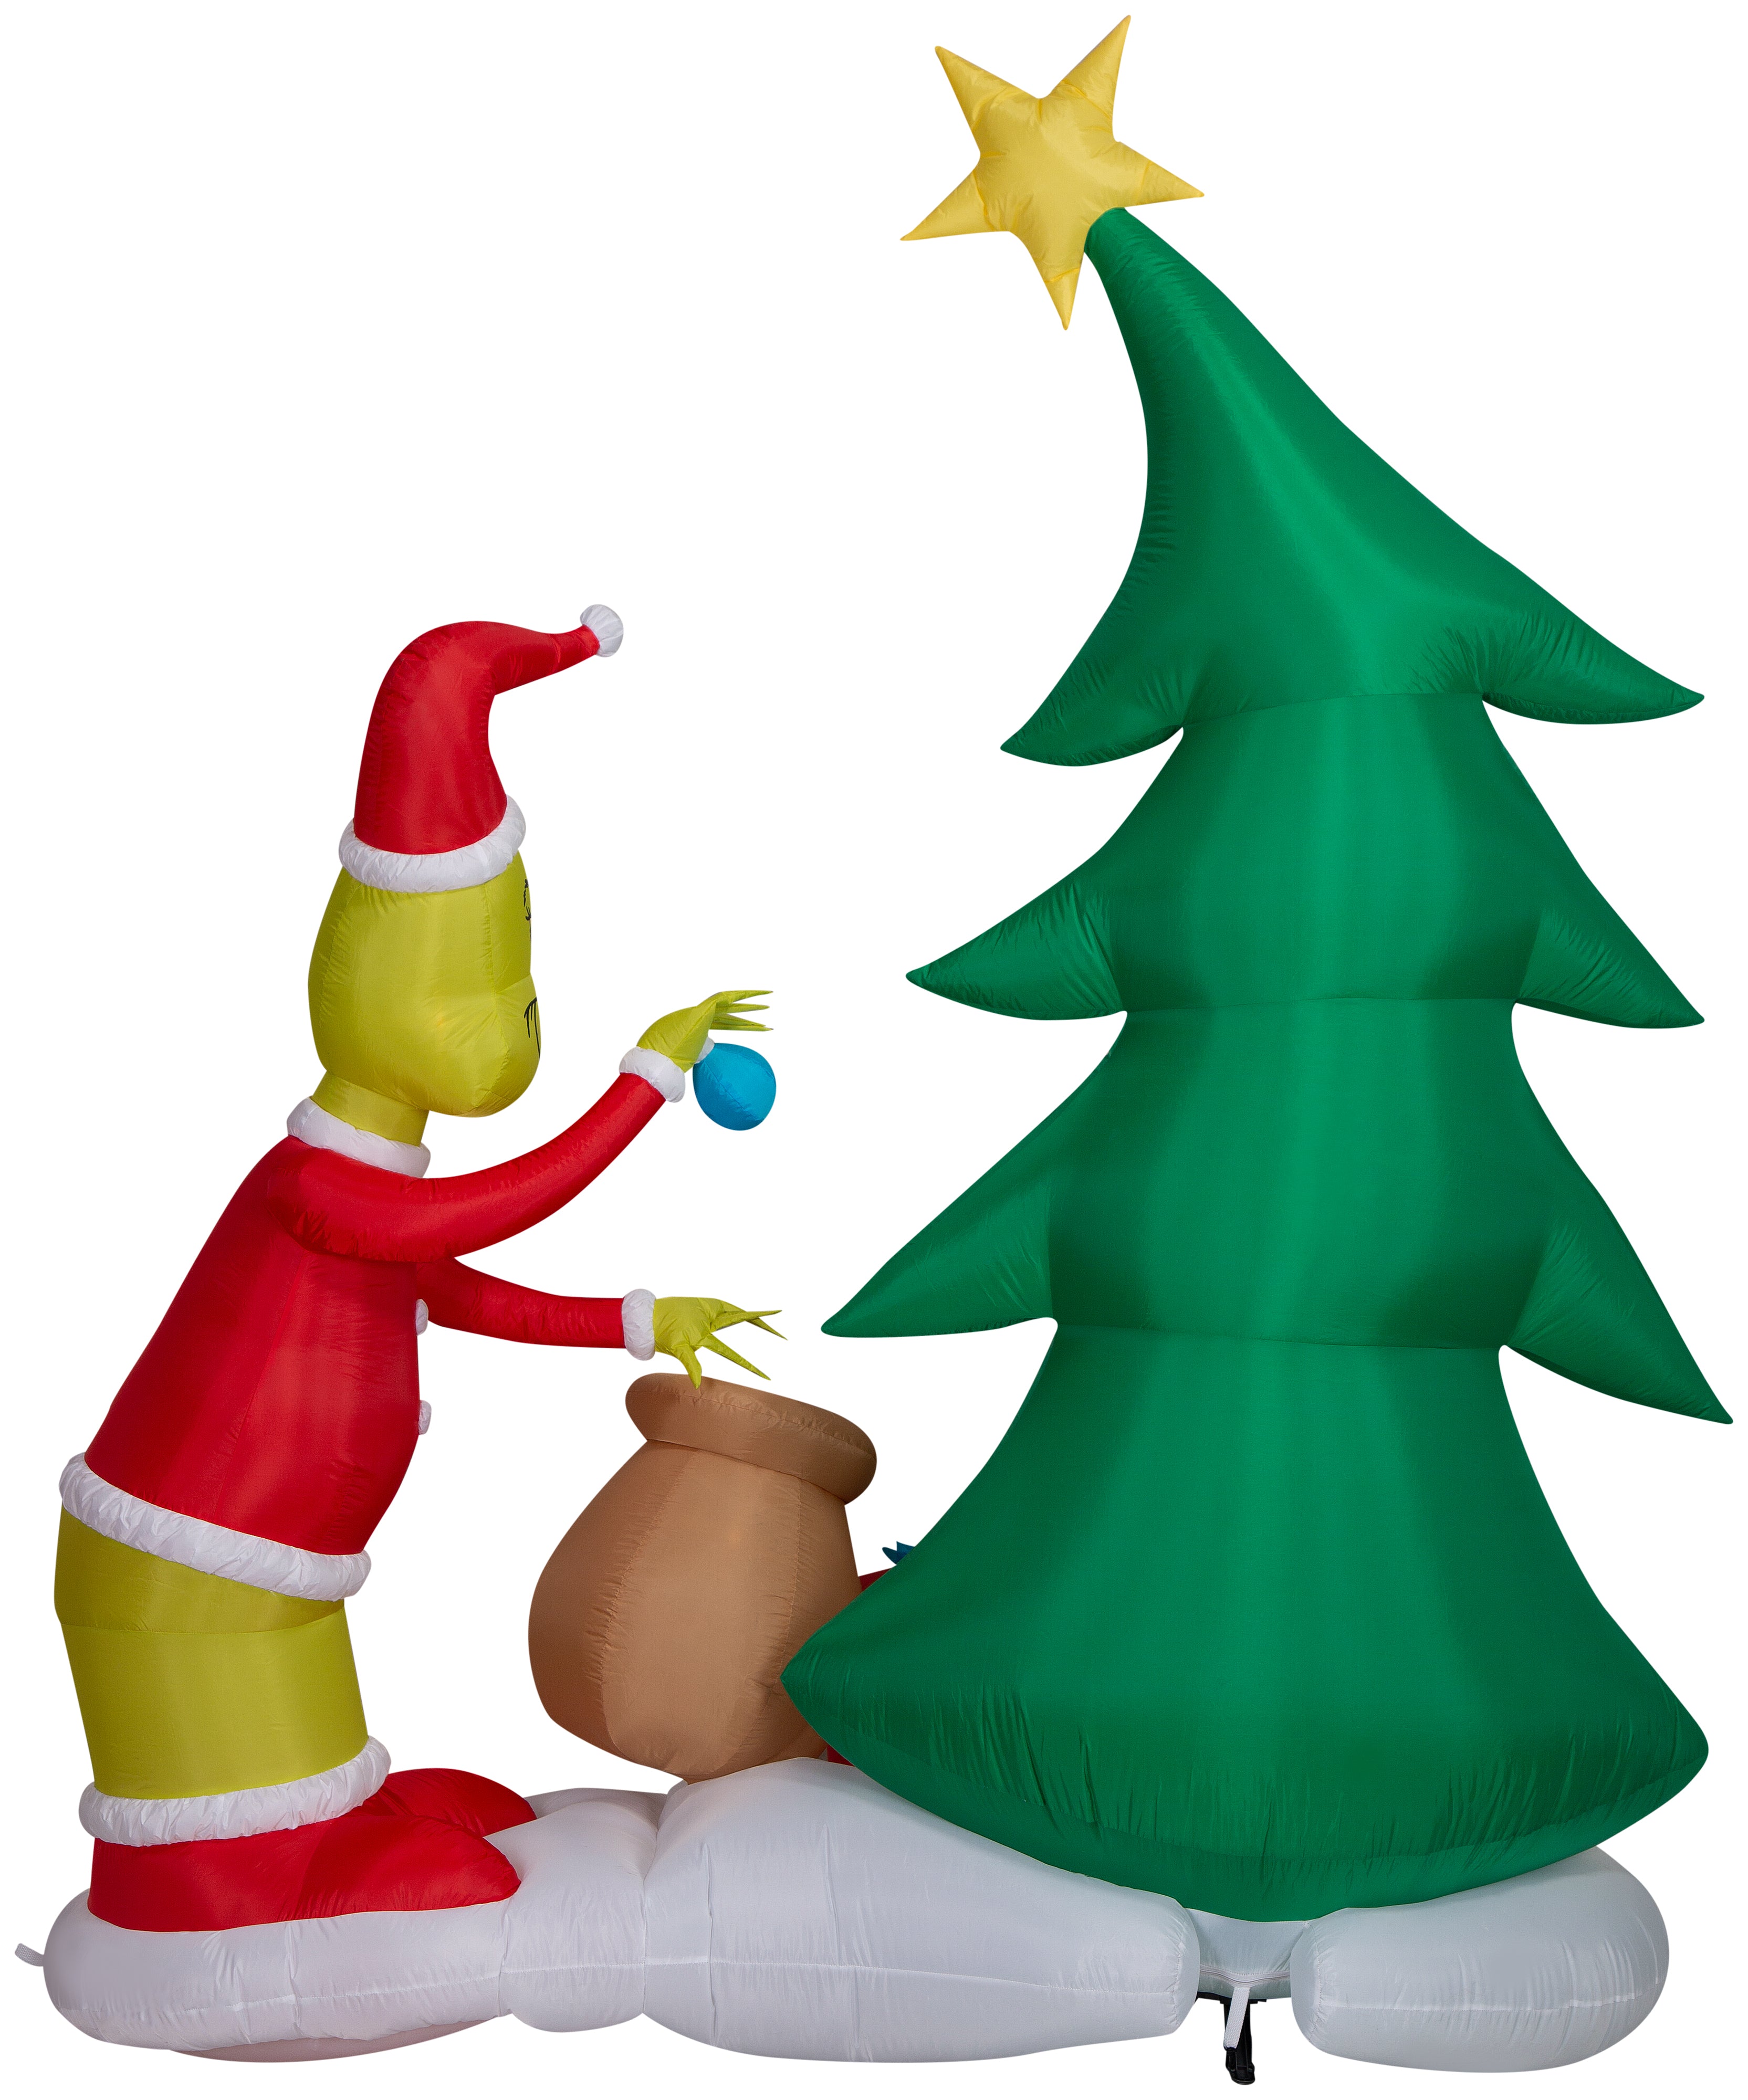 Gemmy Airblown Inflatable Grinch Putting Ornaments on Tree  LG Scene Dr. Seuss , 8.5 ft Tall